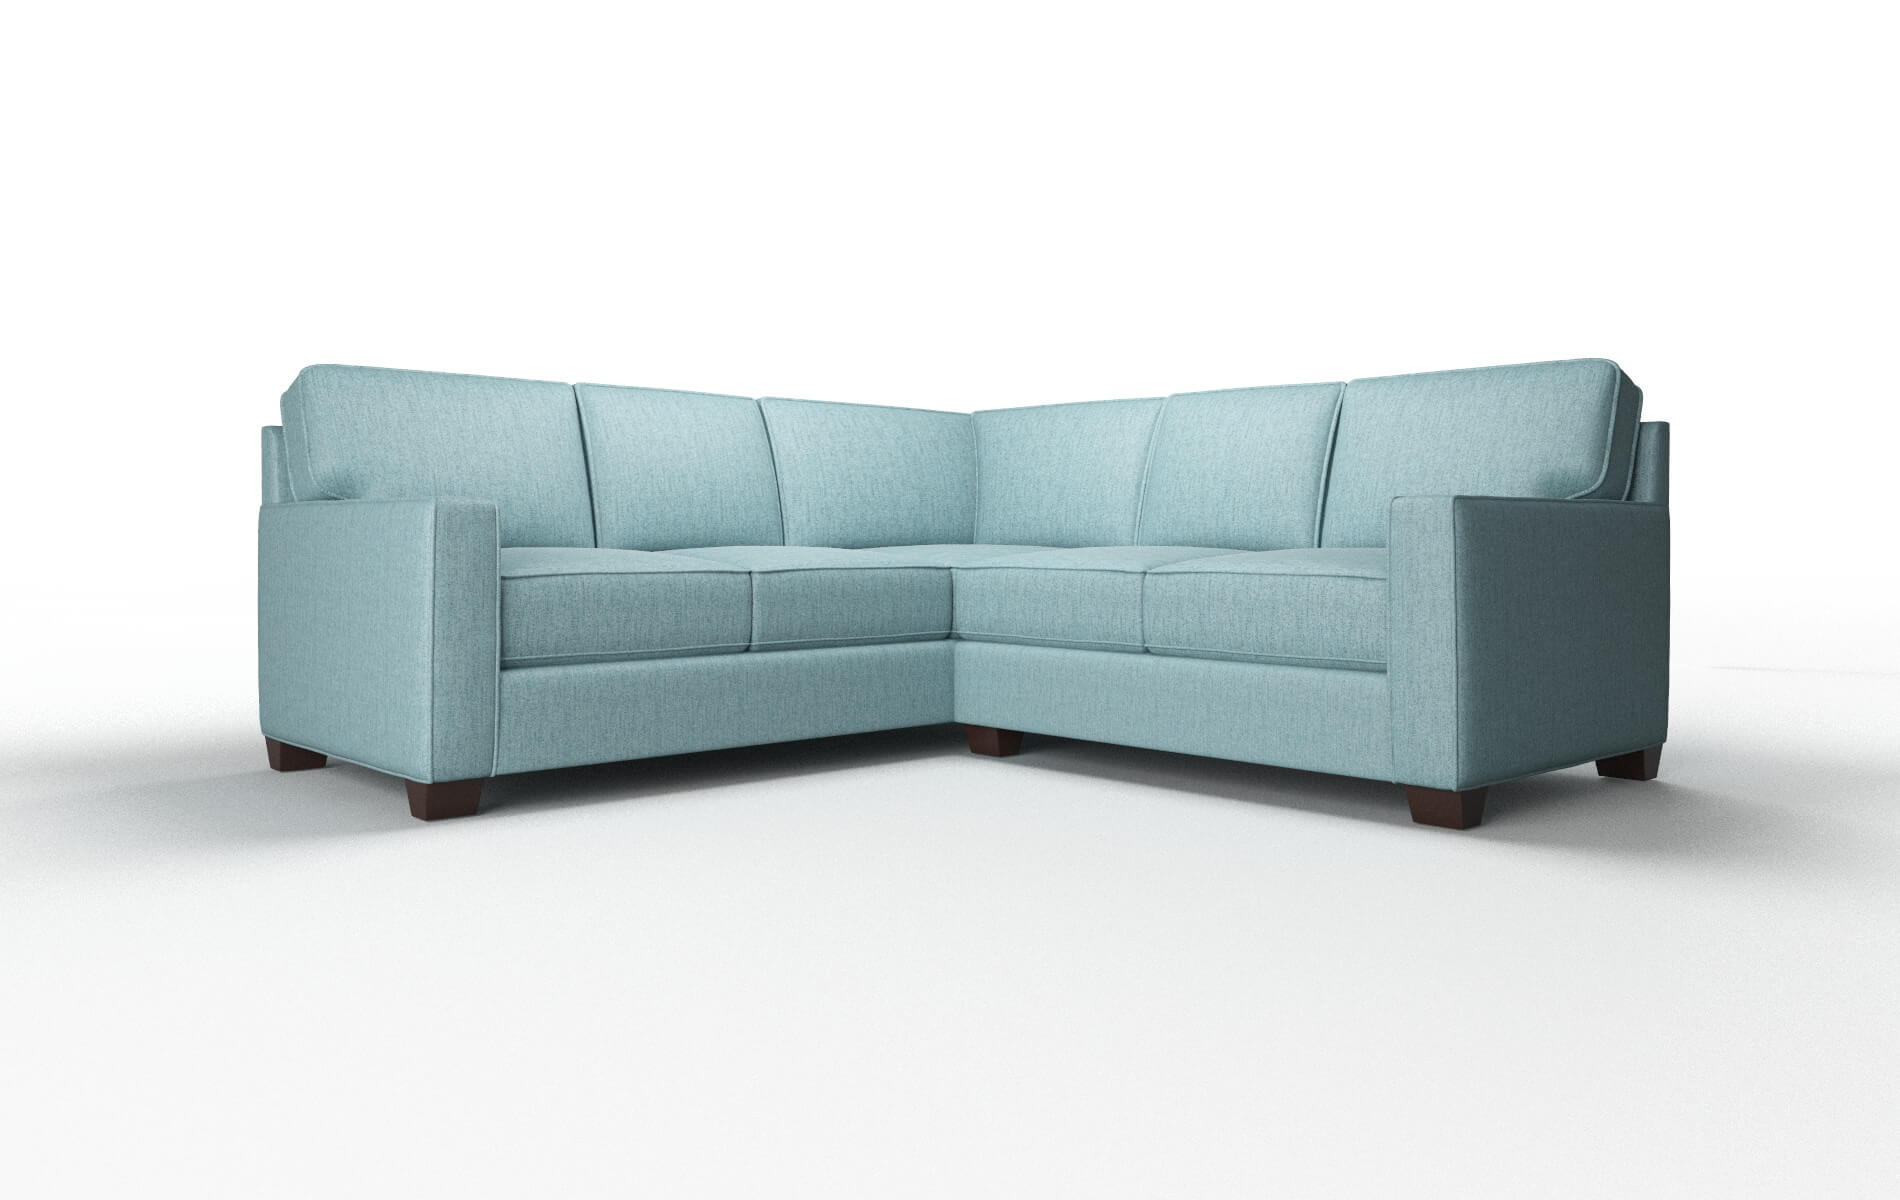 Chicago Insight Peacock Sectional espresso legs